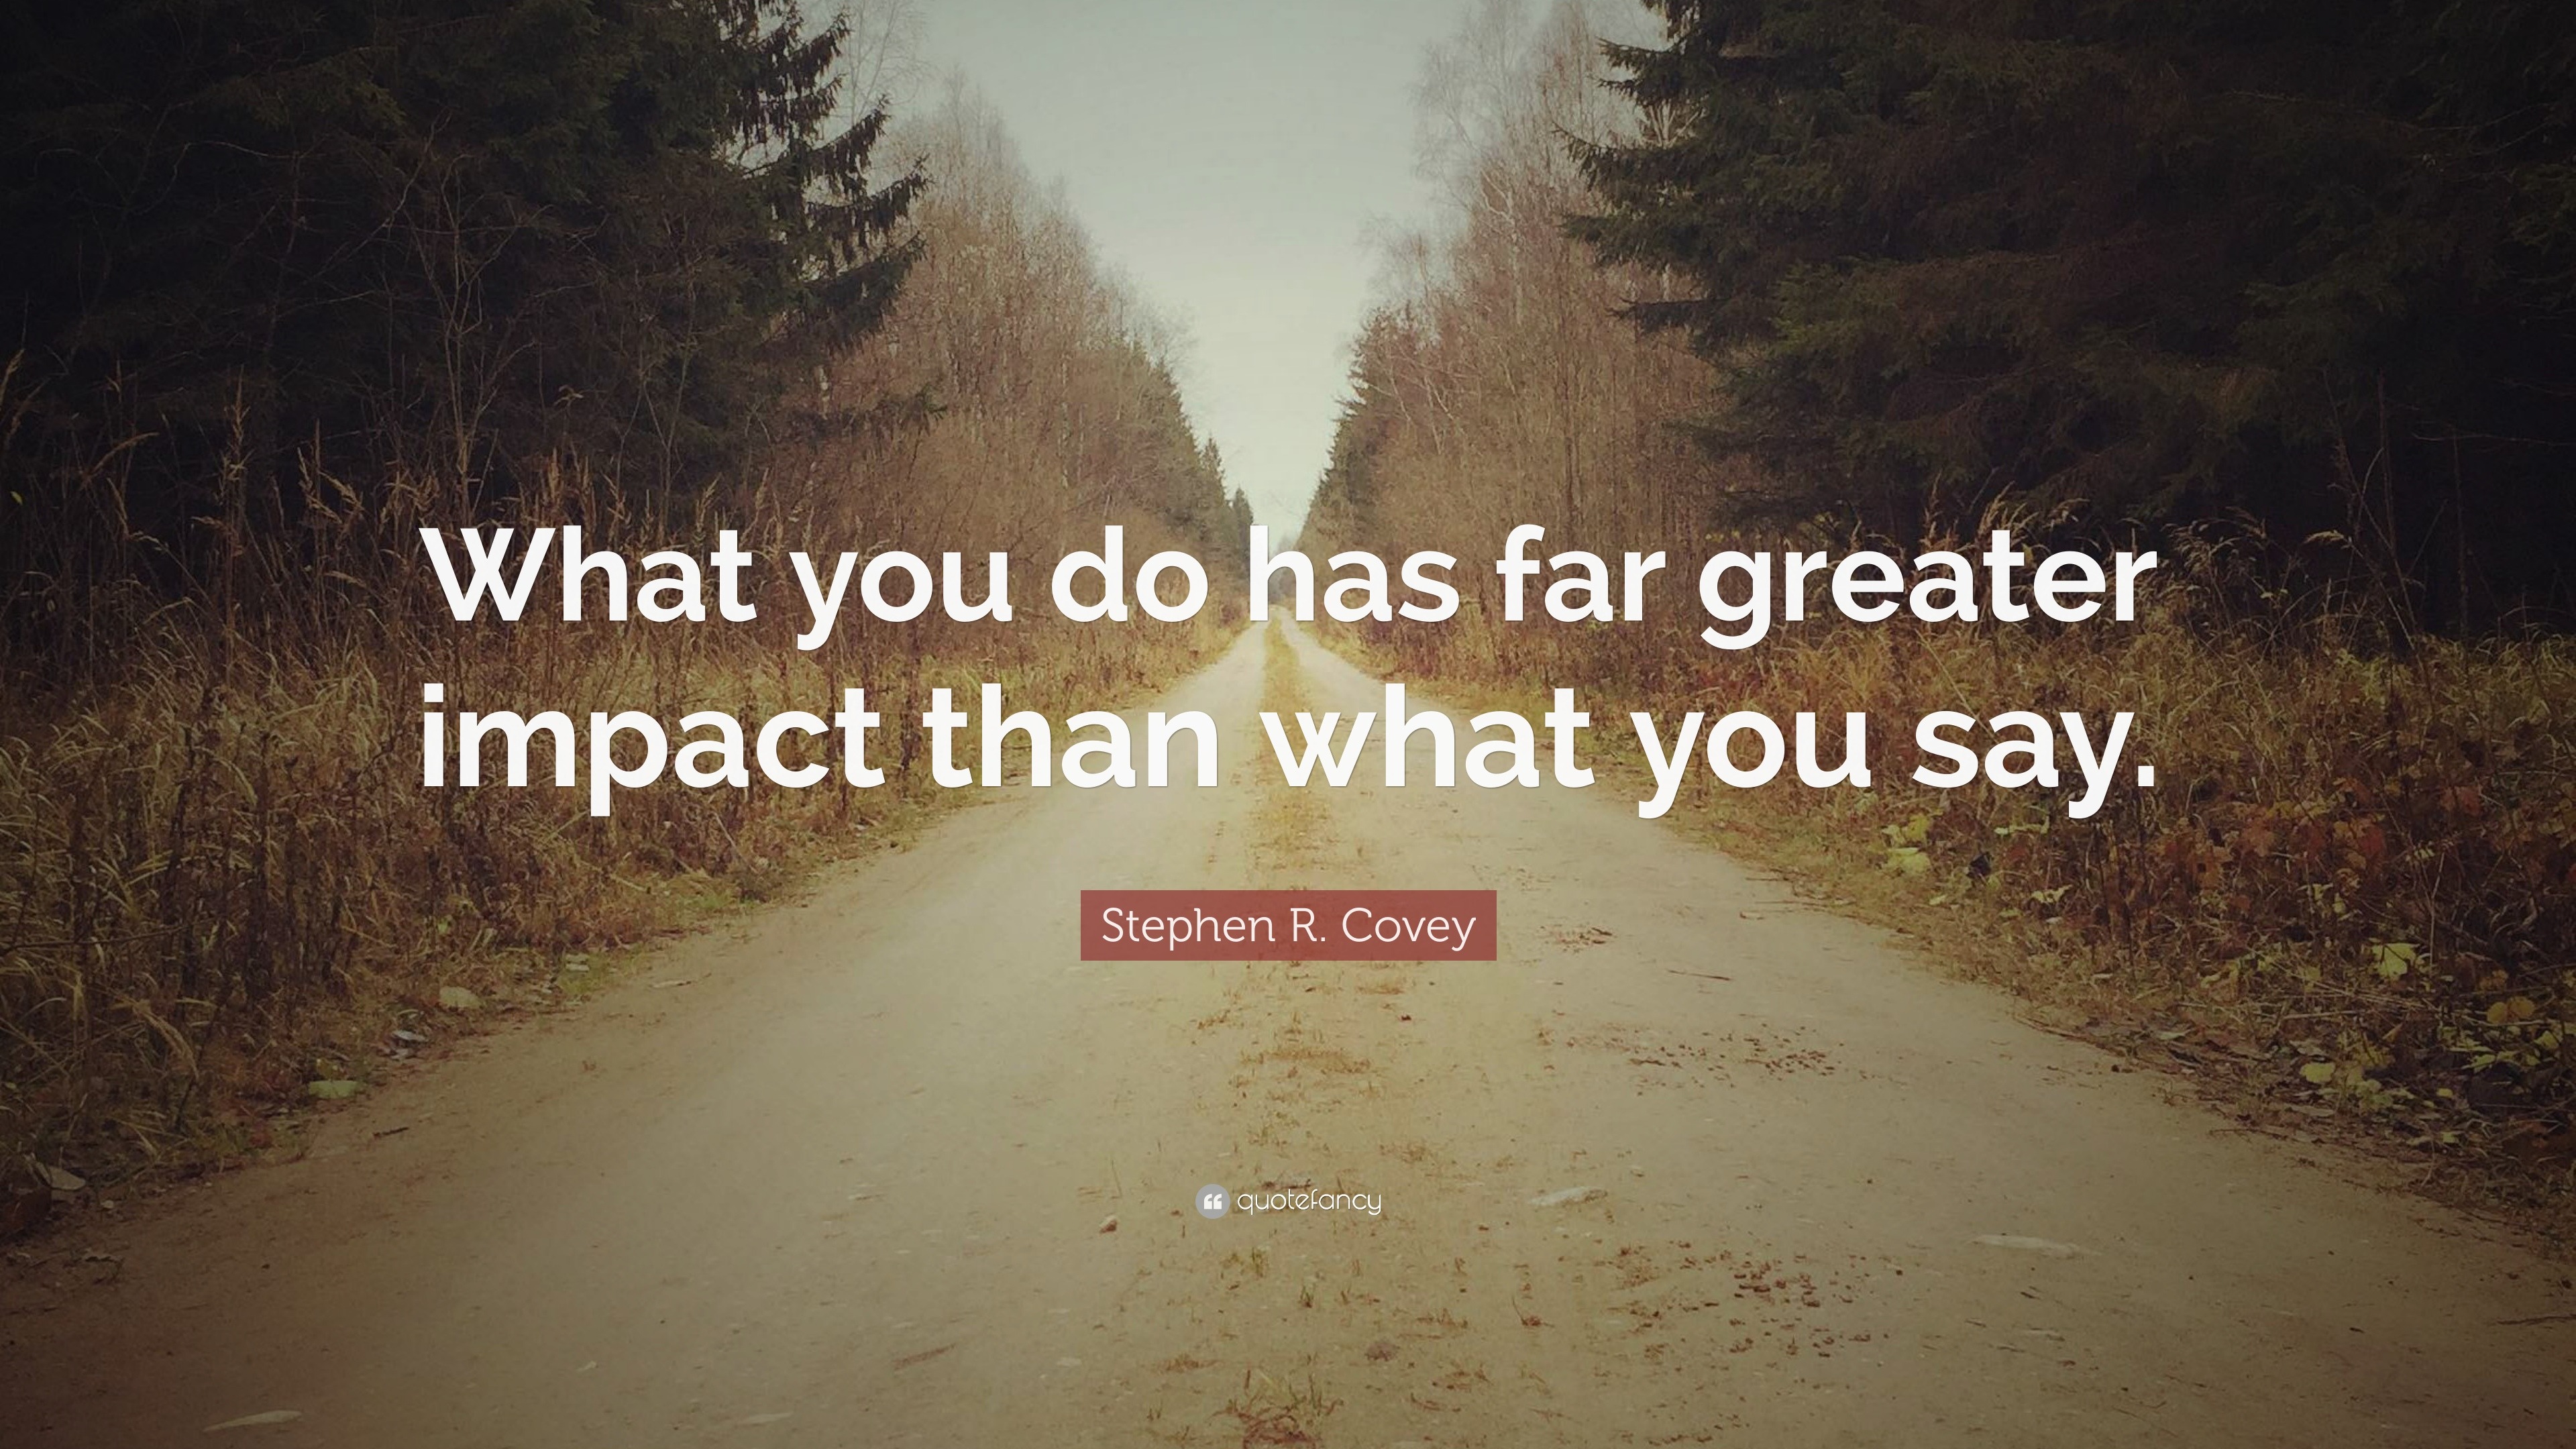 Stephen R. Covey Quote: “What you do has far greater impact than what